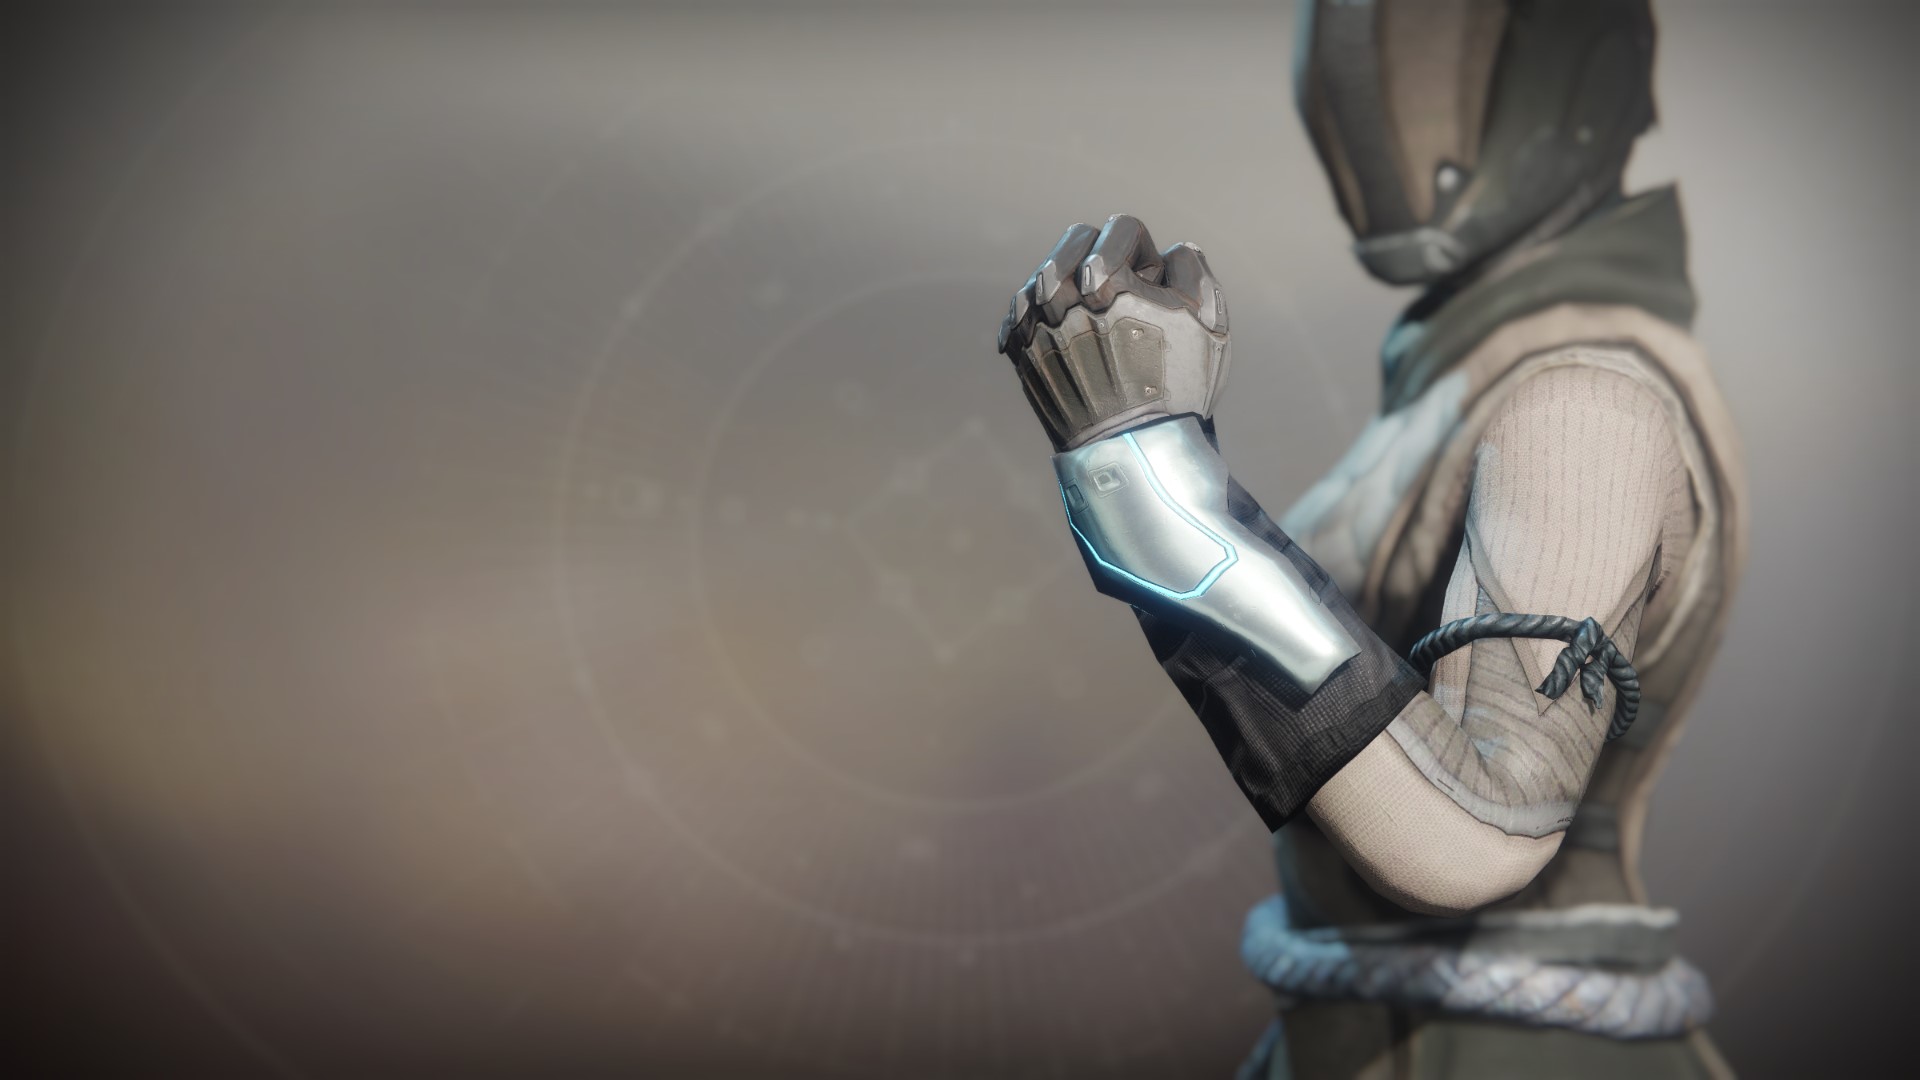 An in-game render of the Righteous Gloves.